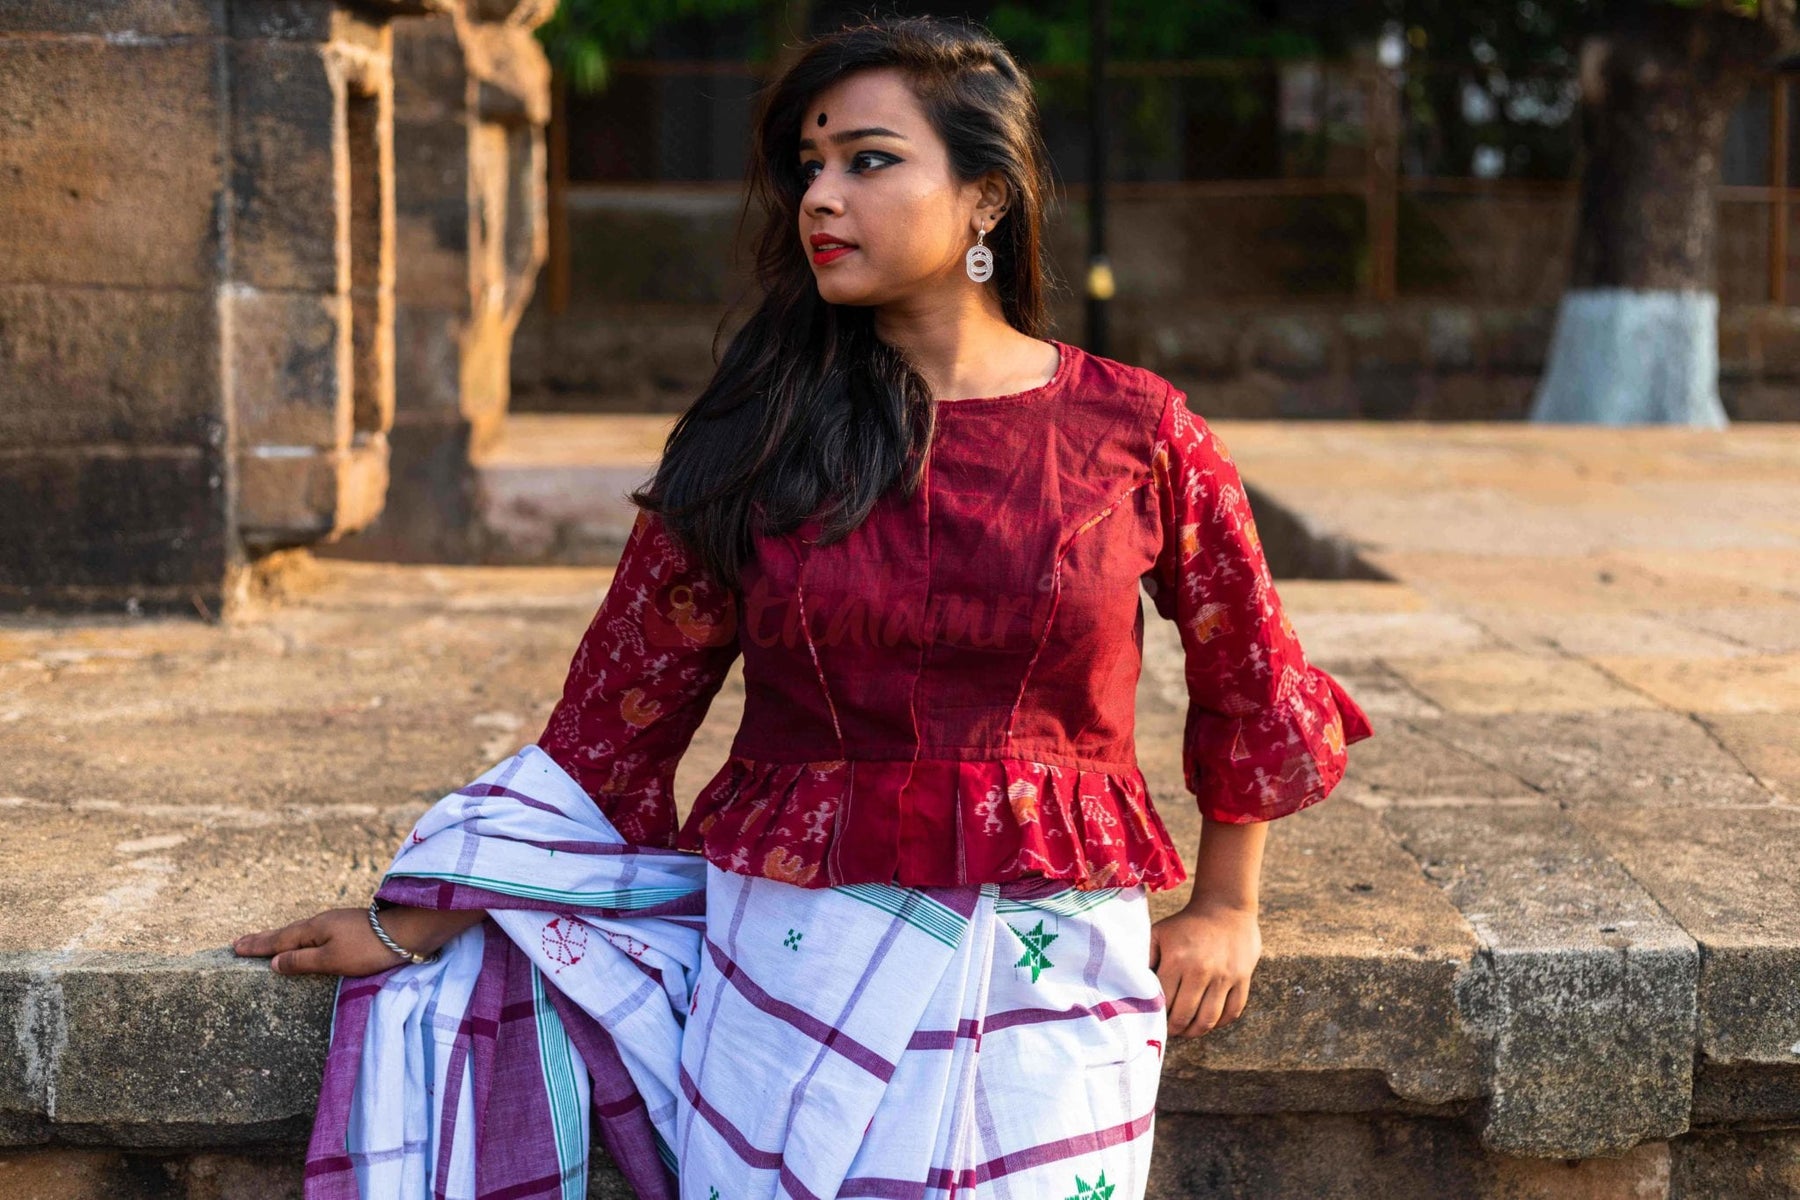 Maroon Tribals, Frilly Hands (Blouse)